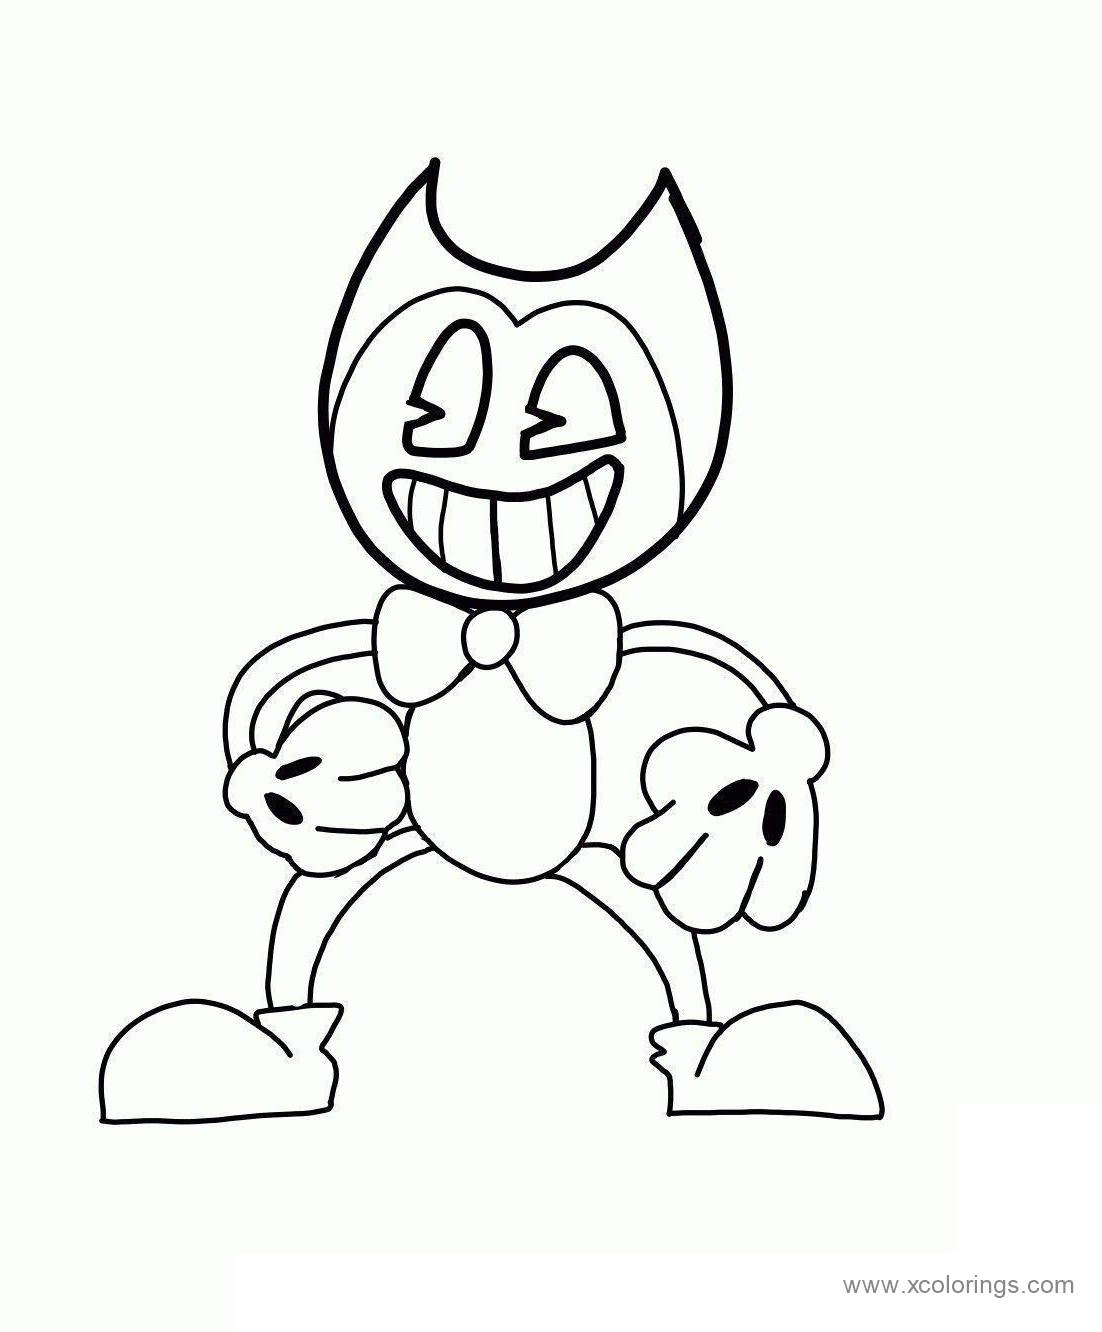 Cute Bendy Coloring Pages - XColorings.com